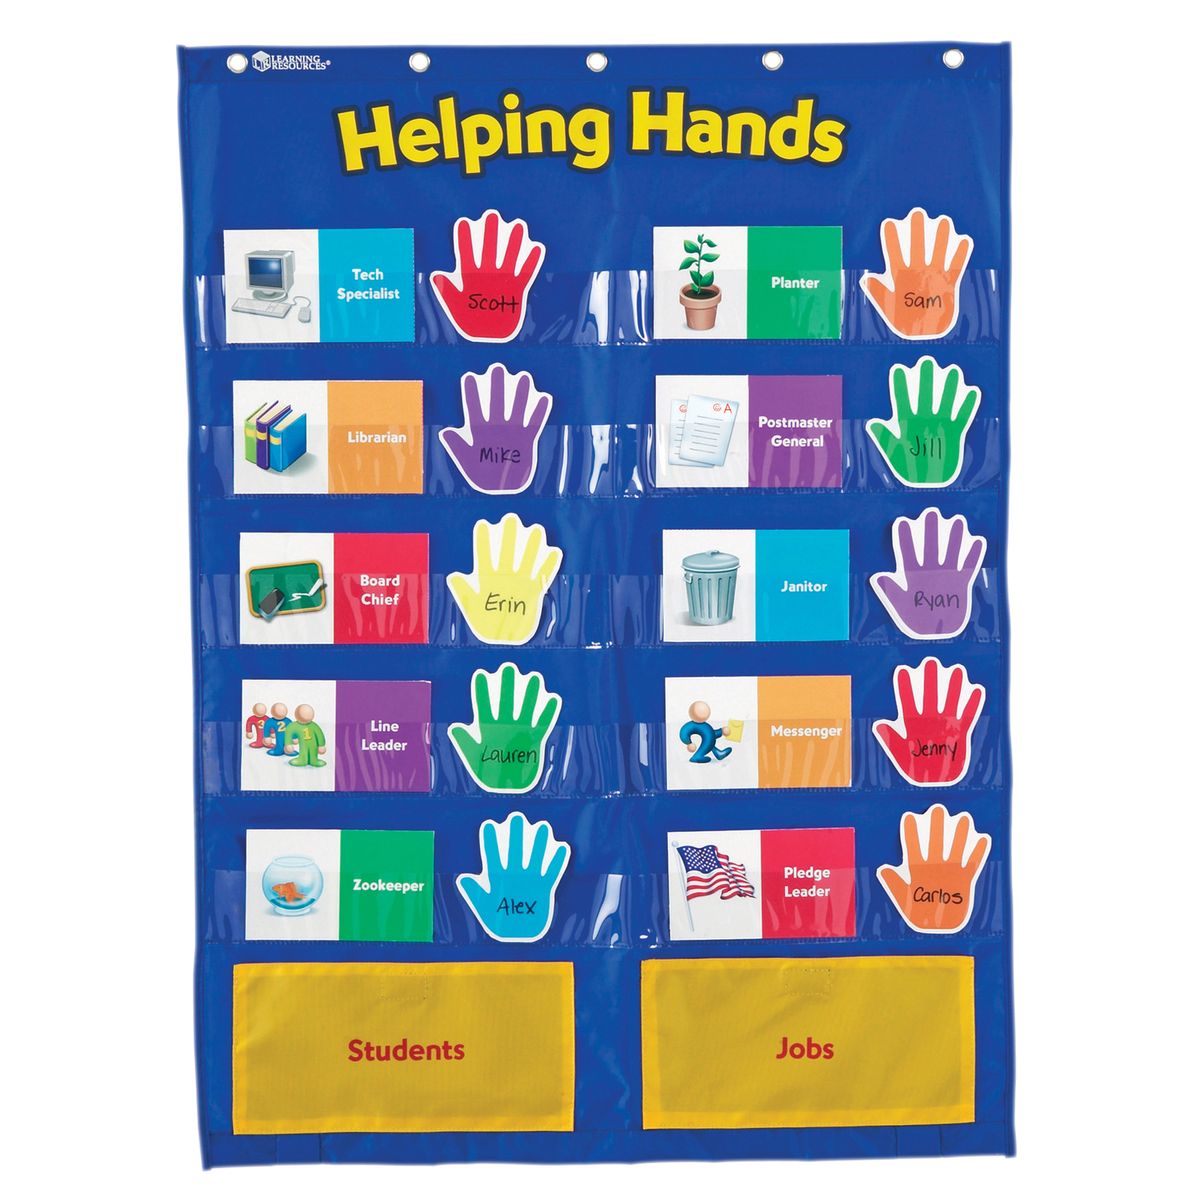 RDY 送料無料 Learning Resources Helping Hands Pocket Chart Multi-Colored 楽天海外通販 Learning Resources Helping Hands Pocket Chart Multi-Colored